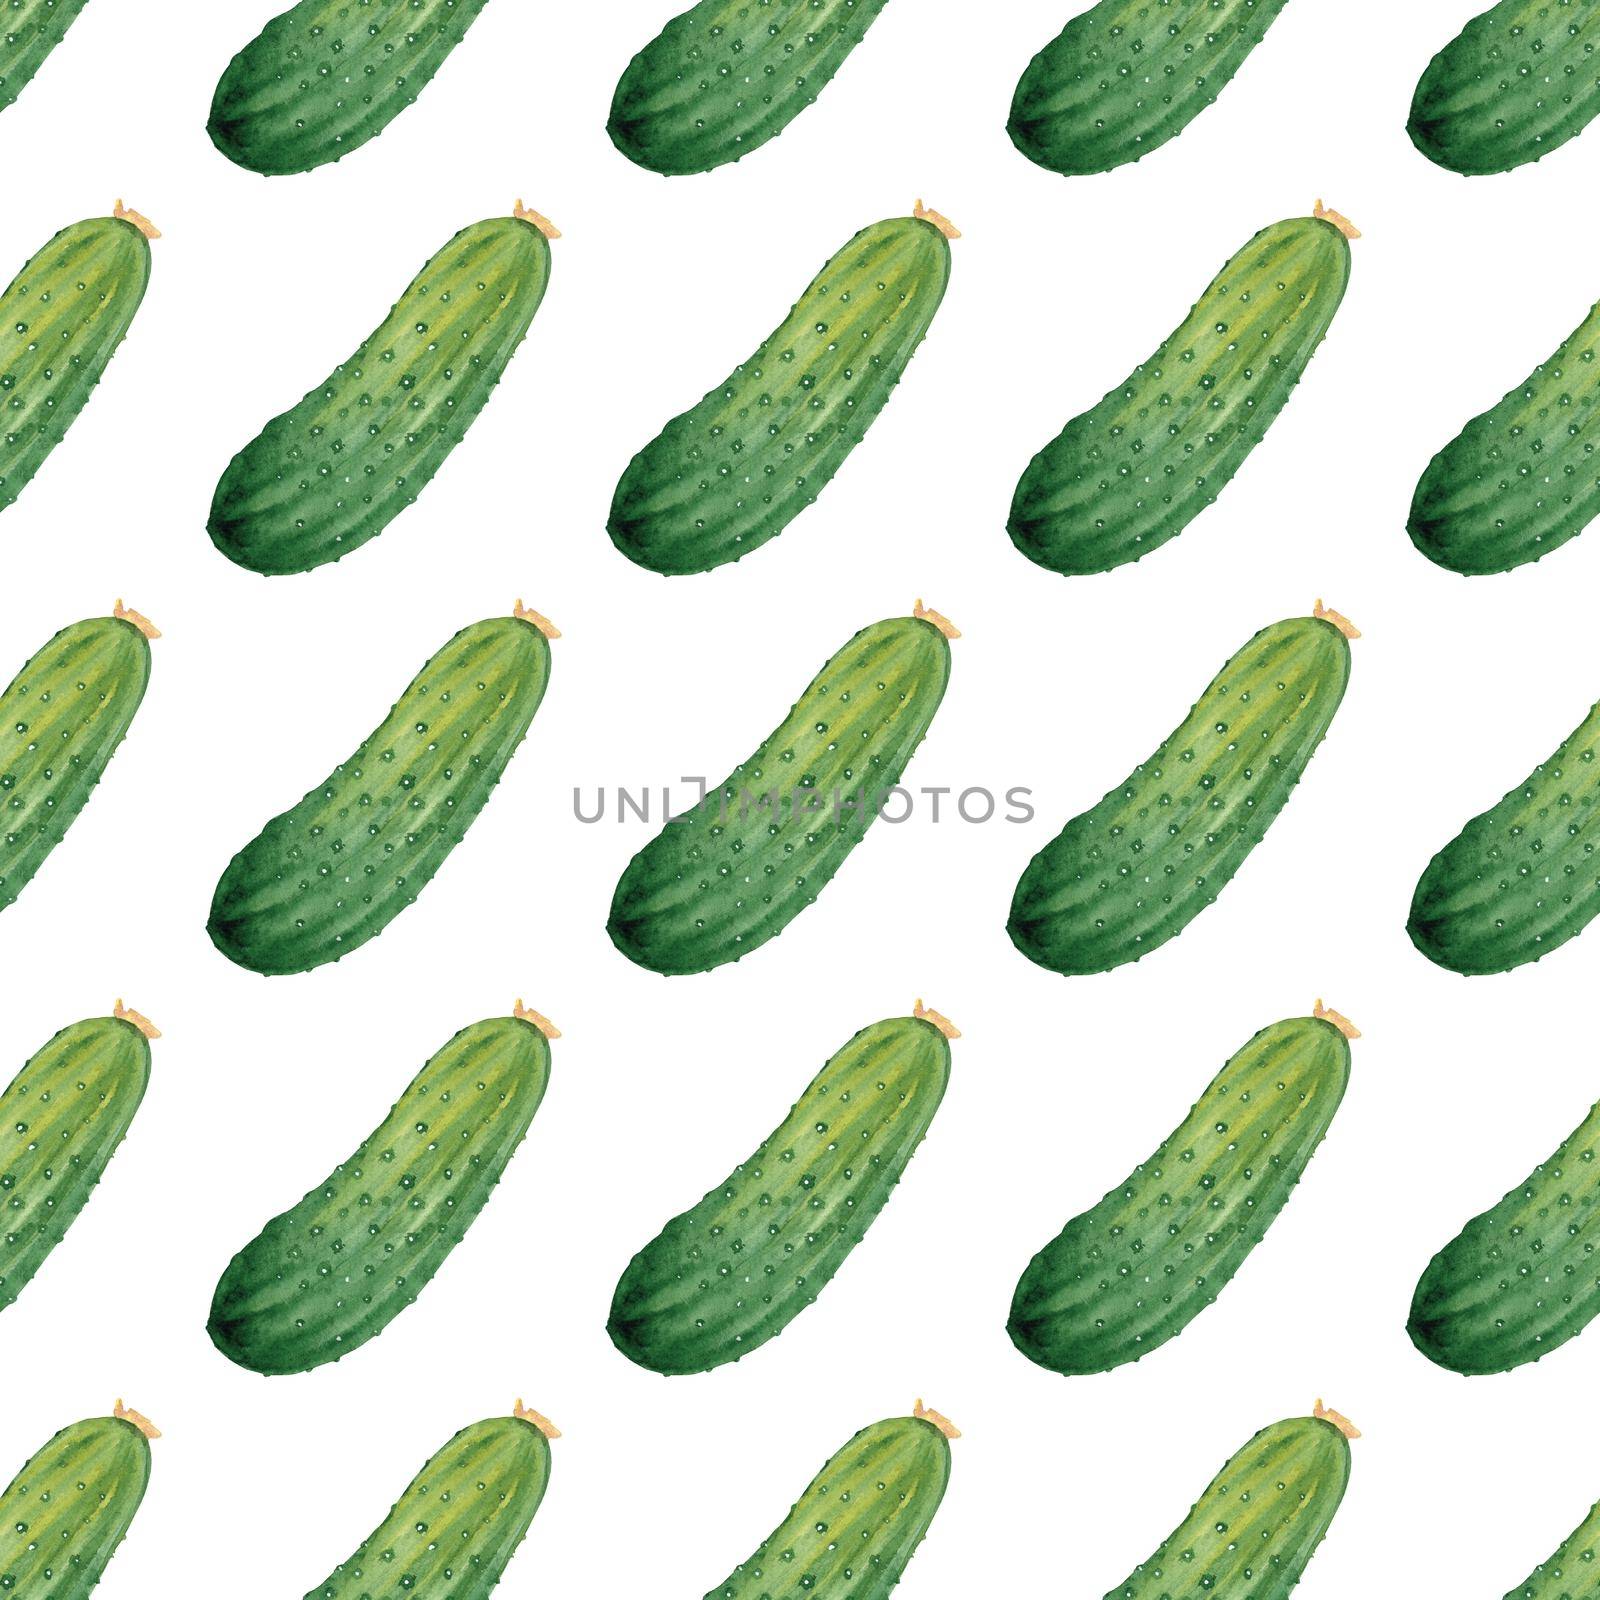 Watercolor green cucumbers seamless pattern on white background by dreamloud